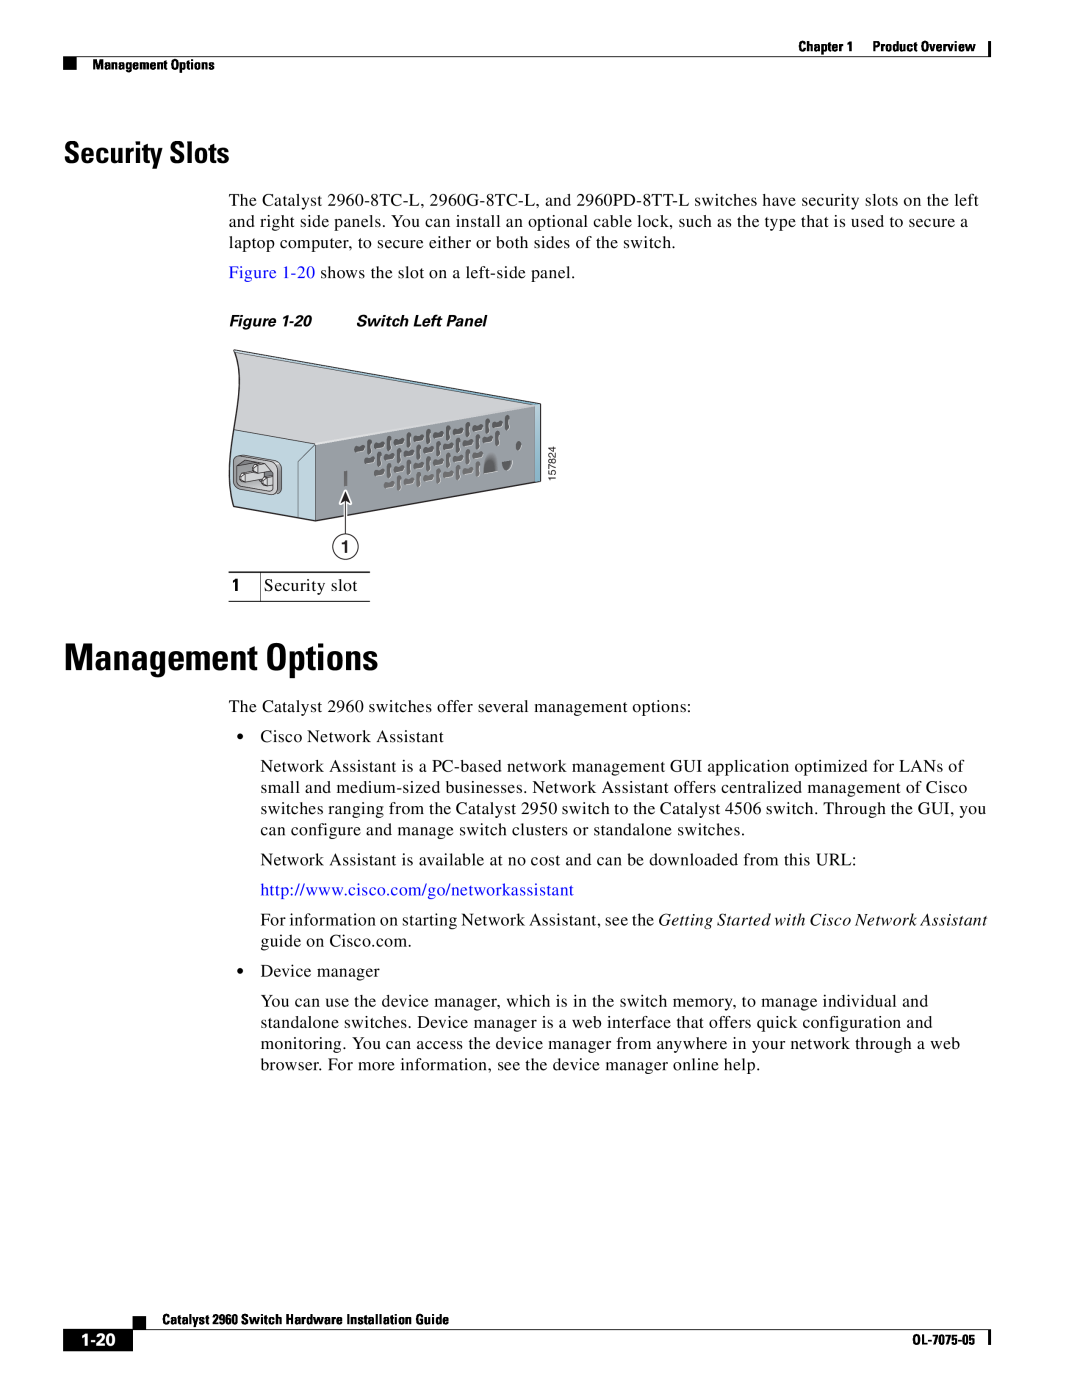 Cisco Systems 2960 specifications Management Options, Security Slots, 1-20 